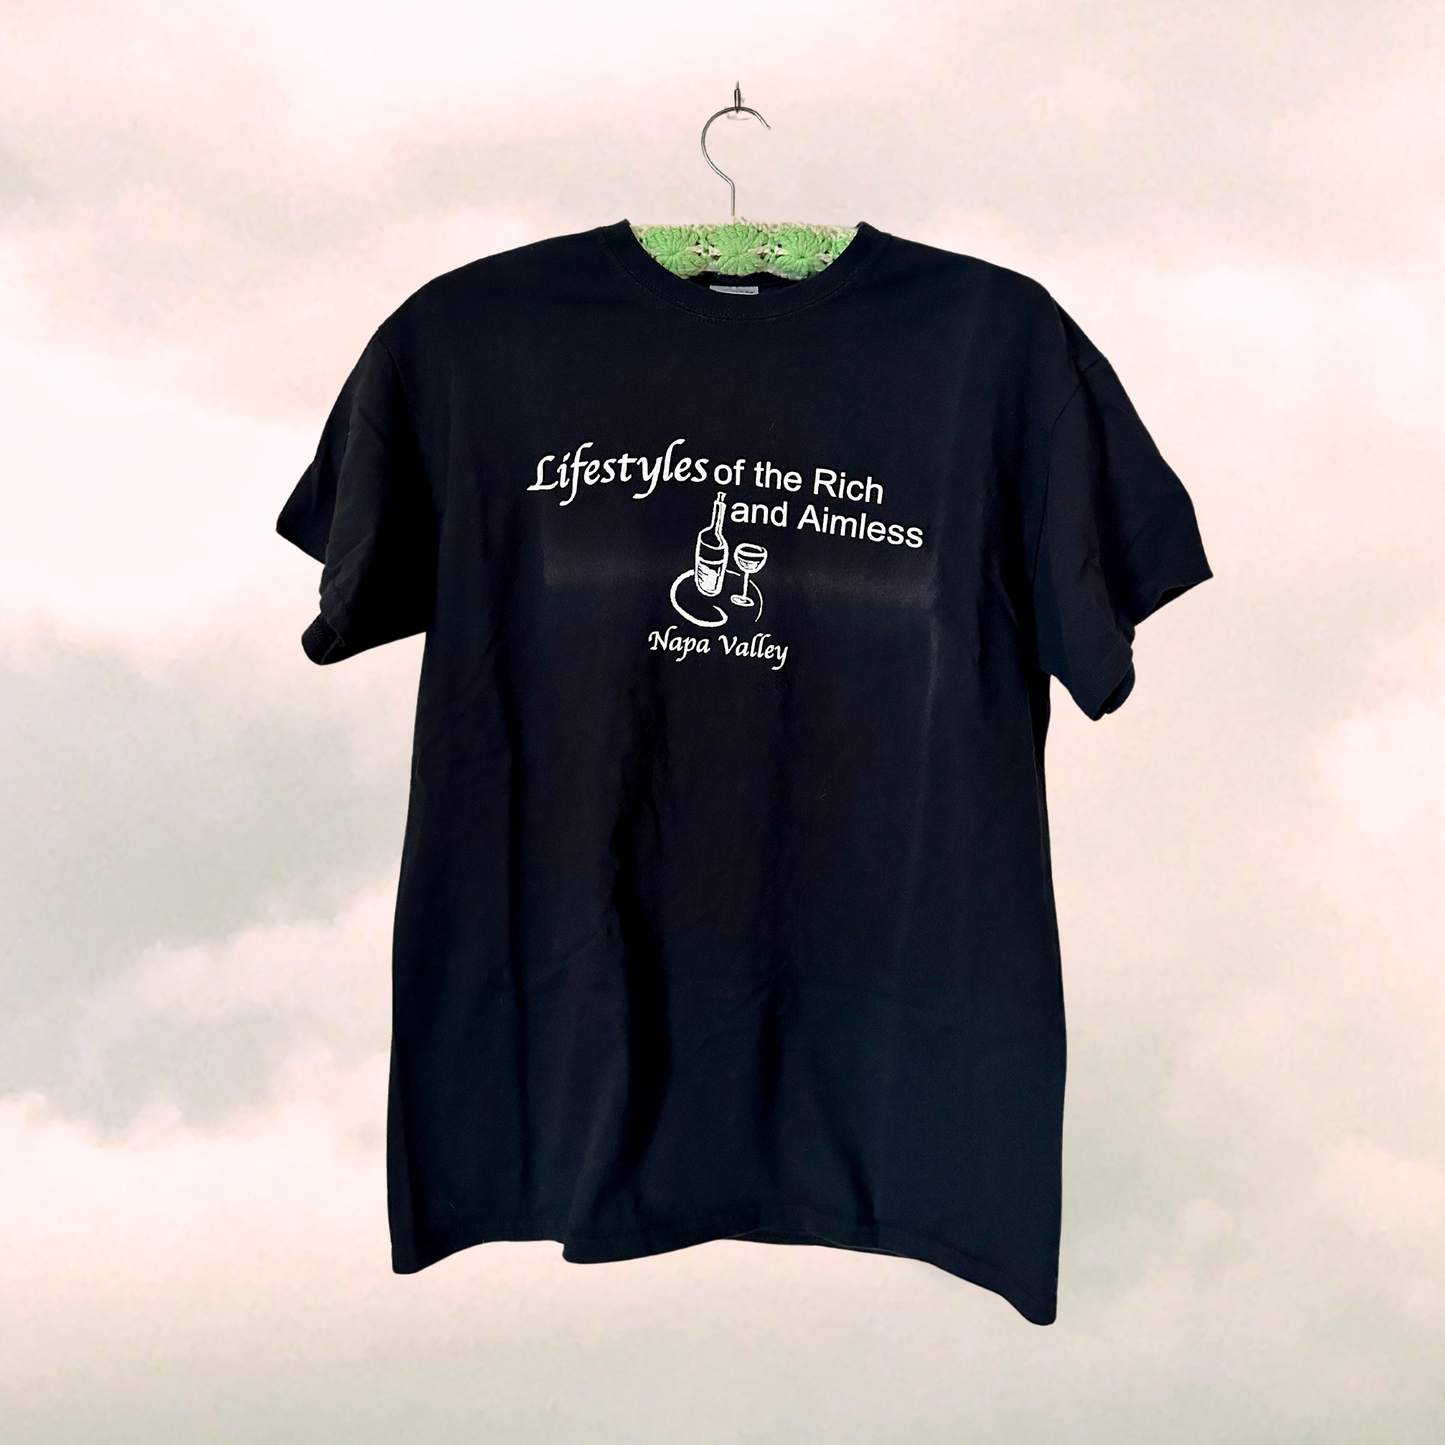 Lifestyles of the Rich and the Aimless Vintage Camiseta